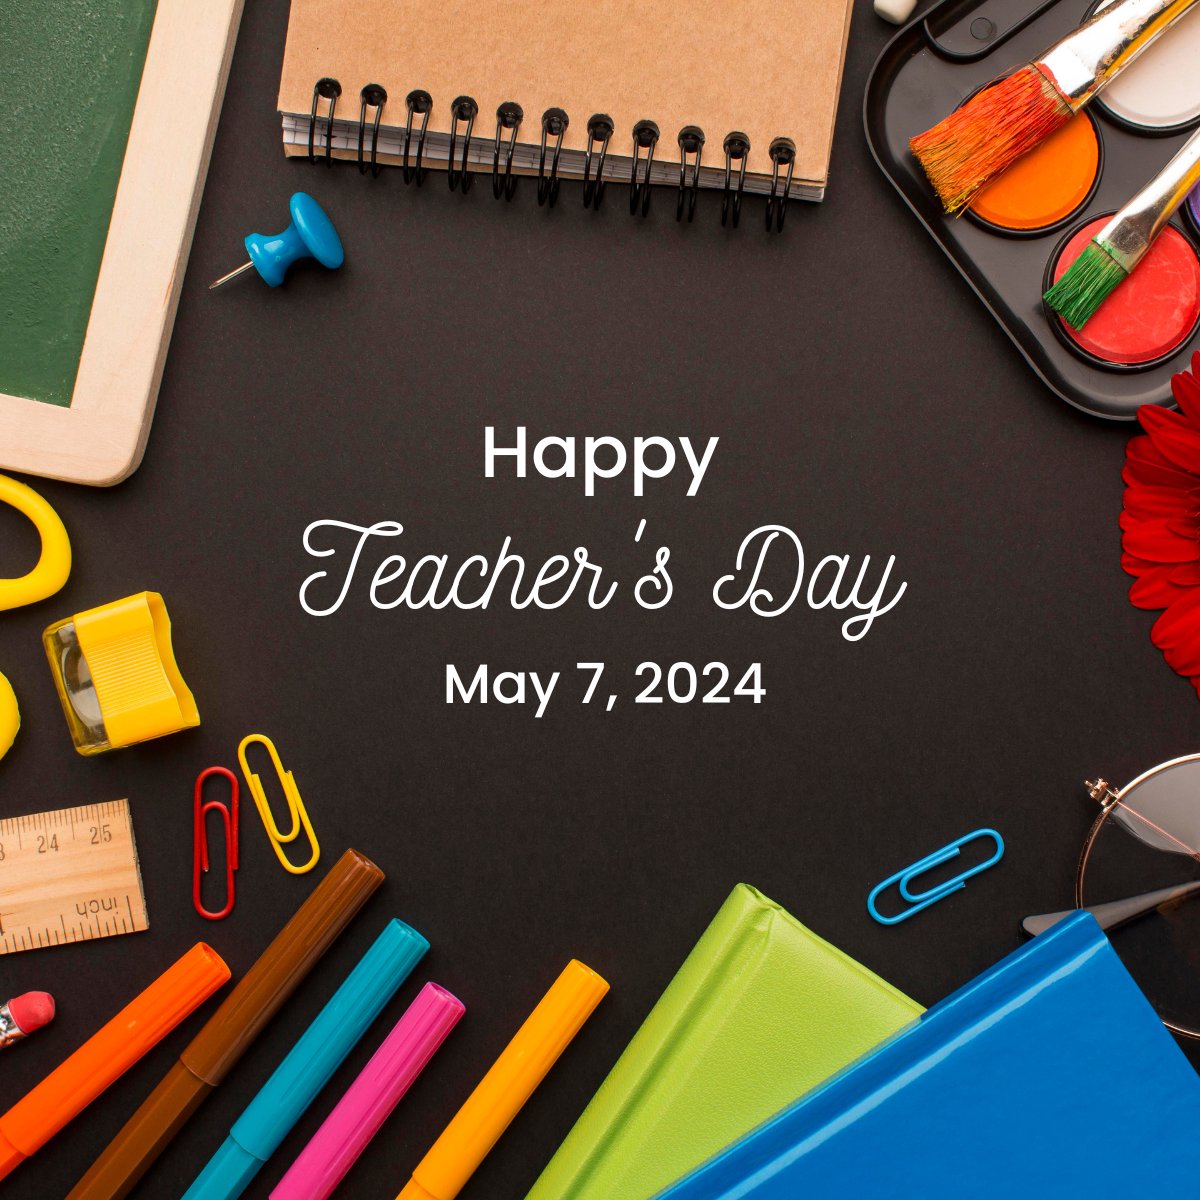 Happy National Teachers' Day to all educators! 🎉🍎 Your dedication shapes futures and inspires endless learning. Thank you for every lesson and all the inspiration. 🌟 #NationalTeachersDay #ThankYouTeachers #EducatorsRock #CareerLearning